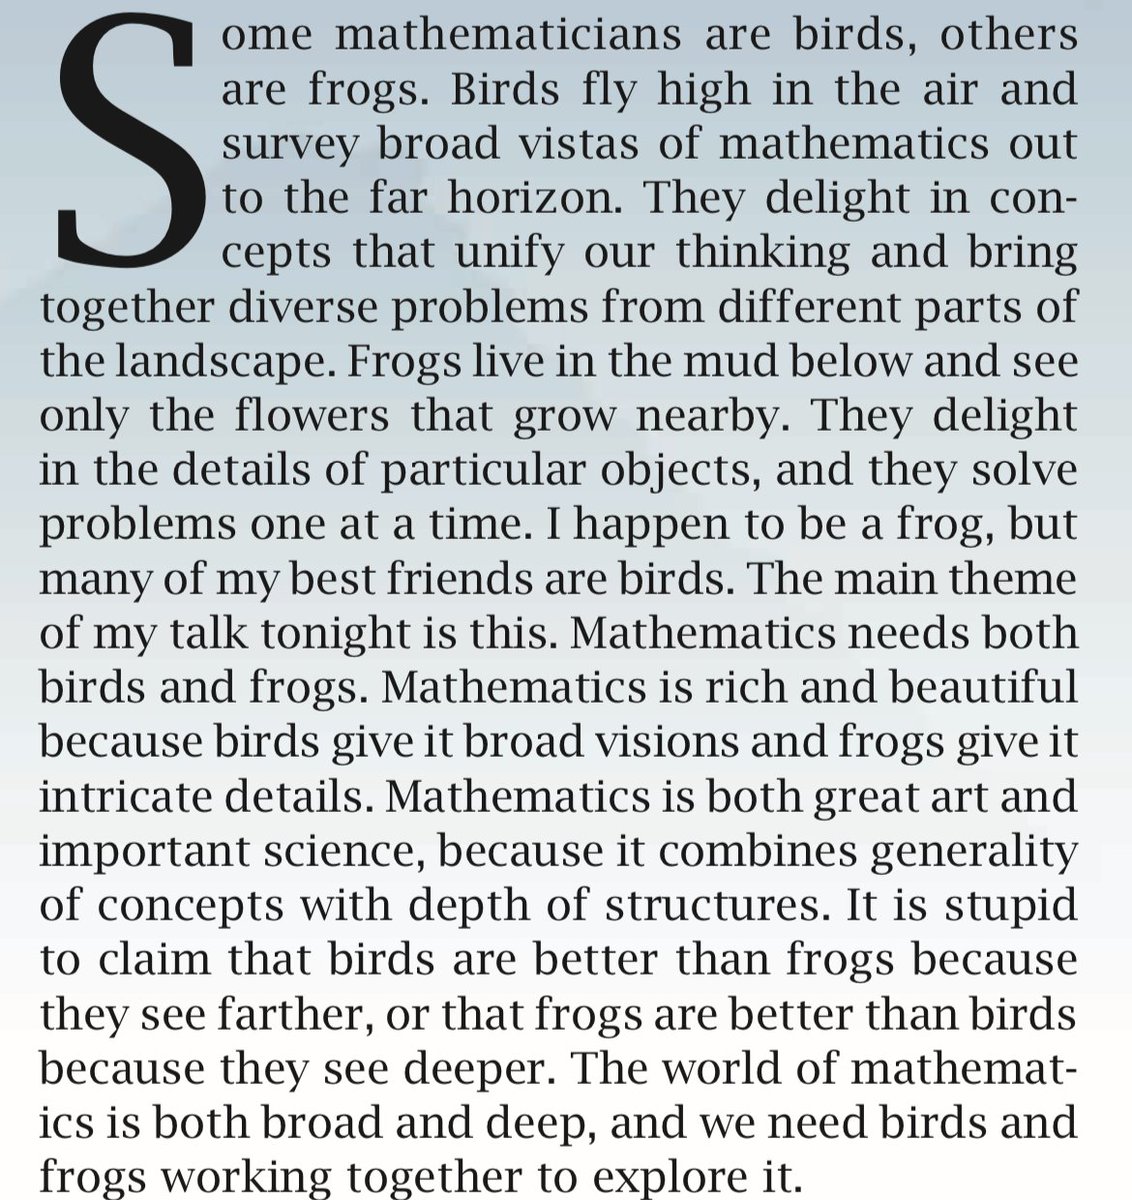 There are scientist birds and scientist frogs. The birds delight in unifying concepts, while the frogs delight in the details of particular objects. Science is rich and beautiful because birds give it broad visions and frogs give it intricate details. (Paraphrasing Freeman Dyson)